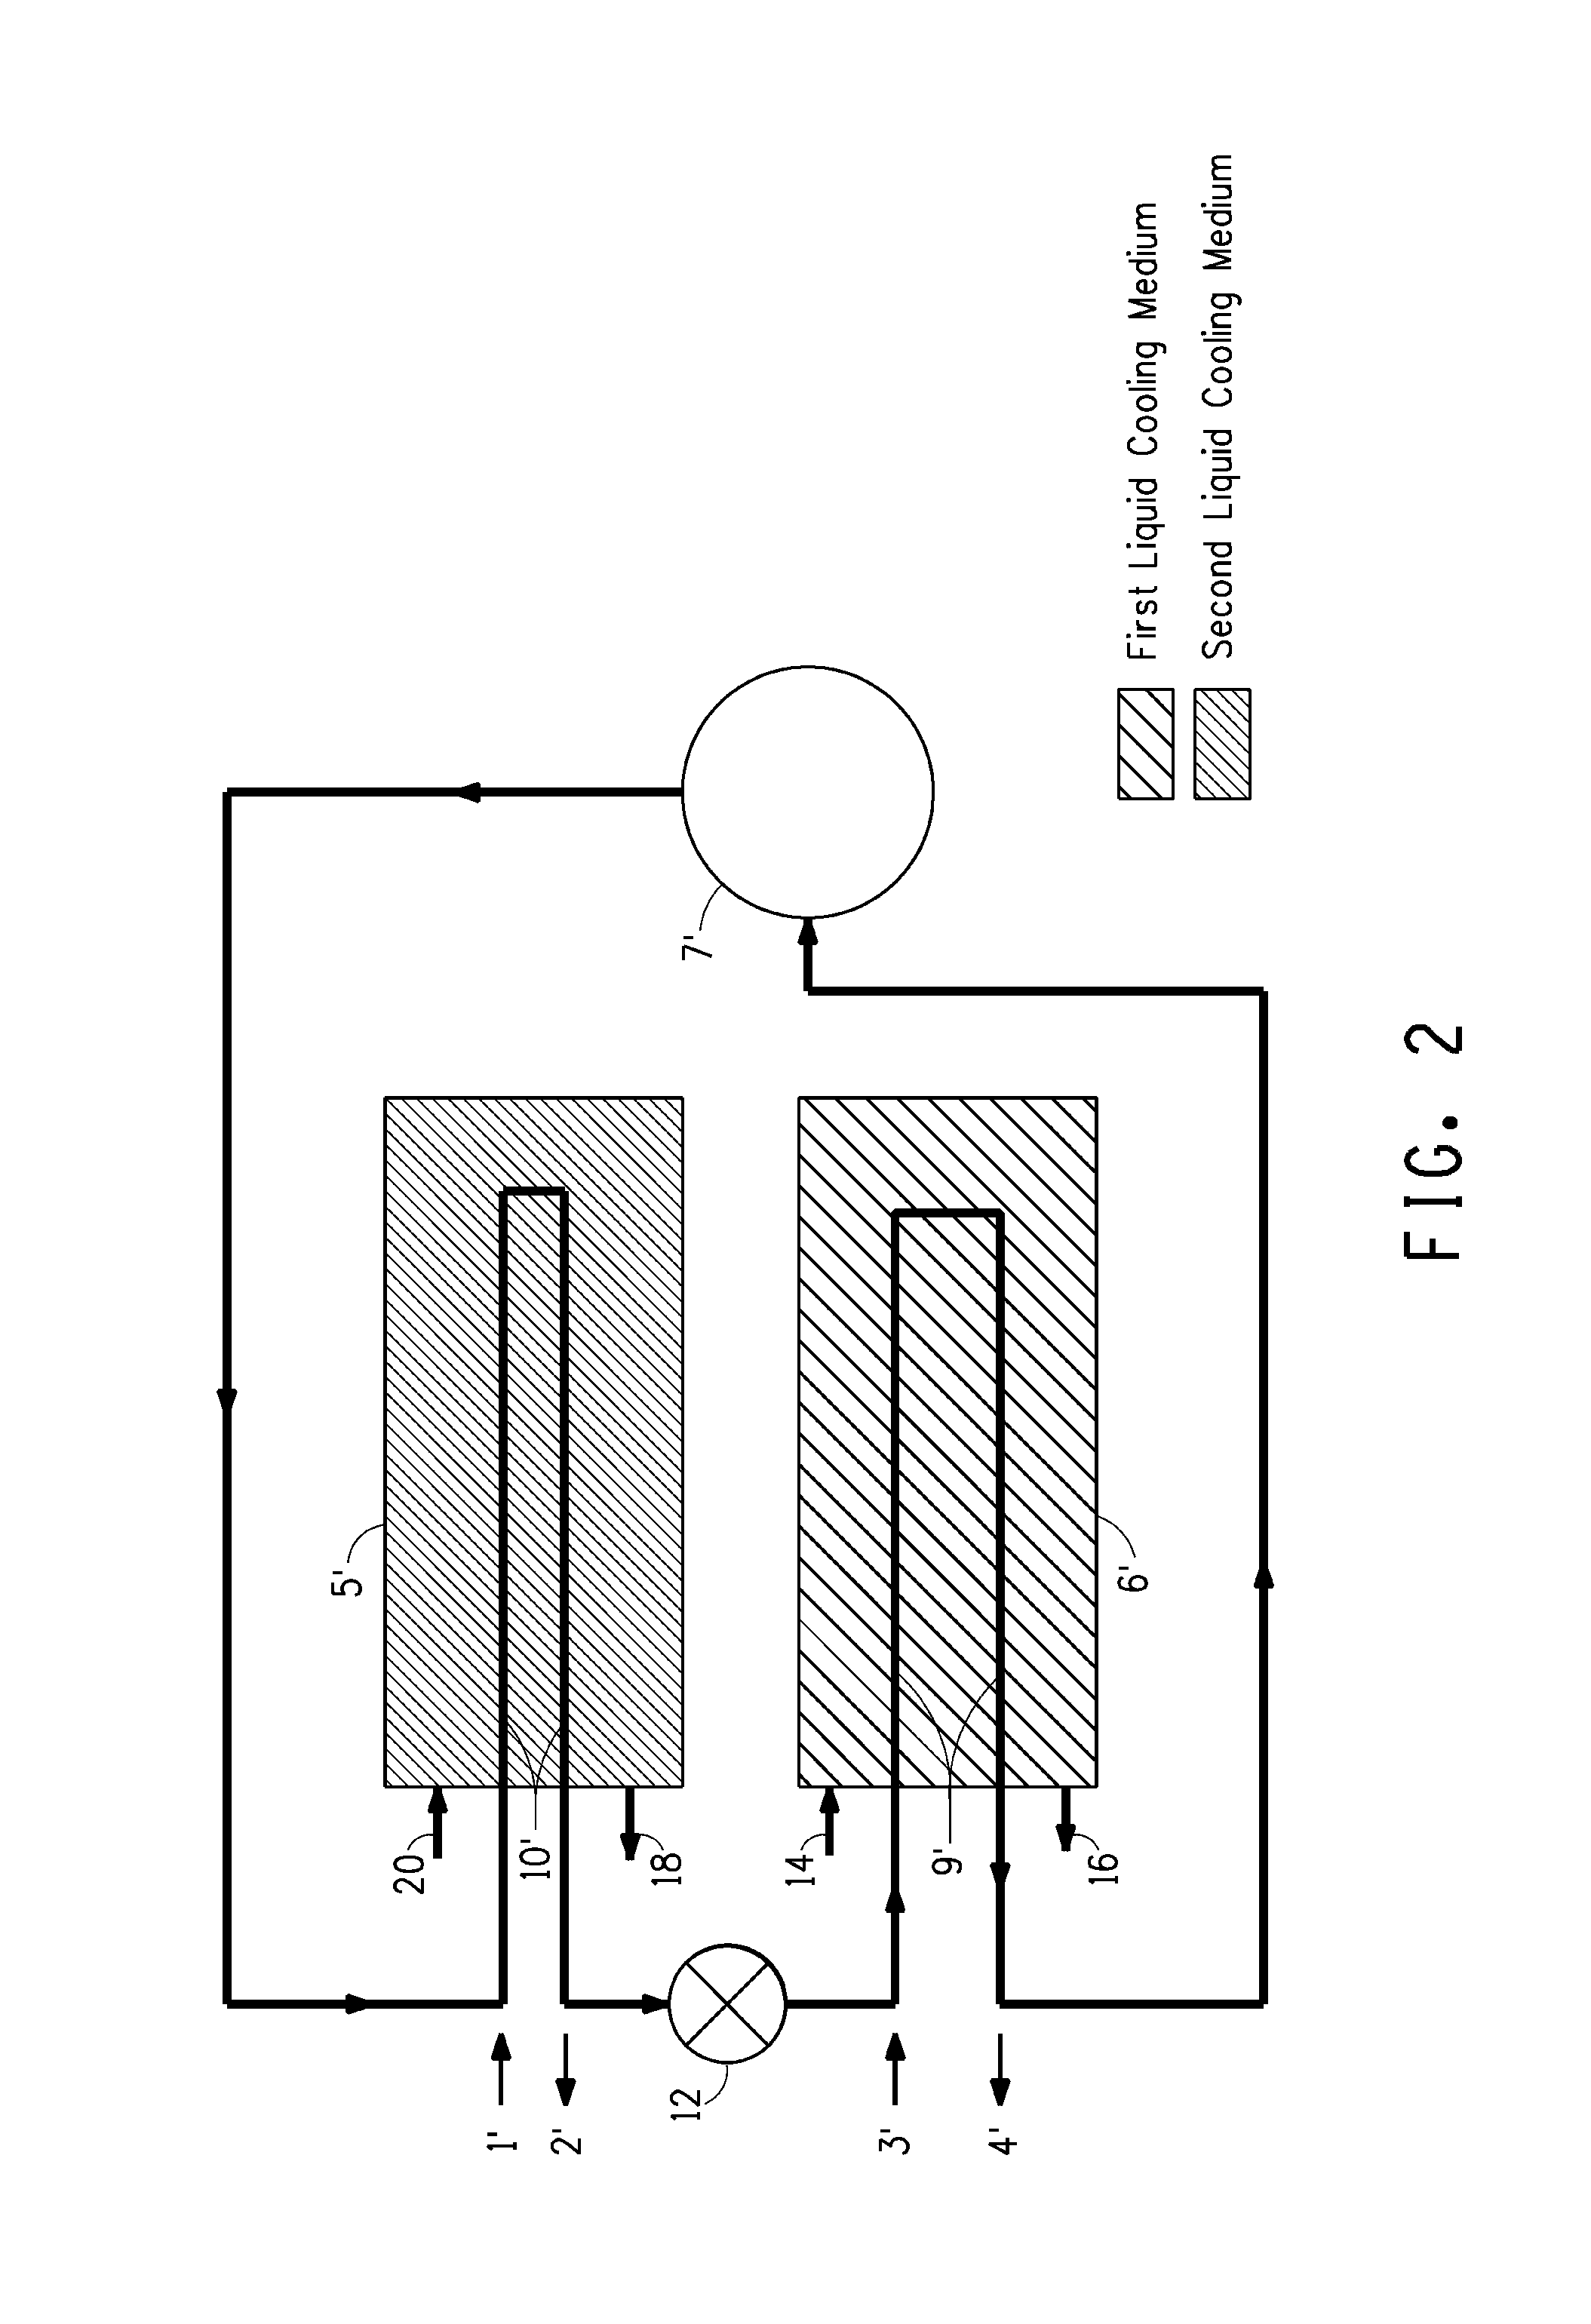 Composition comprising cis-1,1,1,4,4,4-hexafluoro-2-butene and trans-1,2-dichloroethylene, apparatus containing same and methods of producing cooling therein